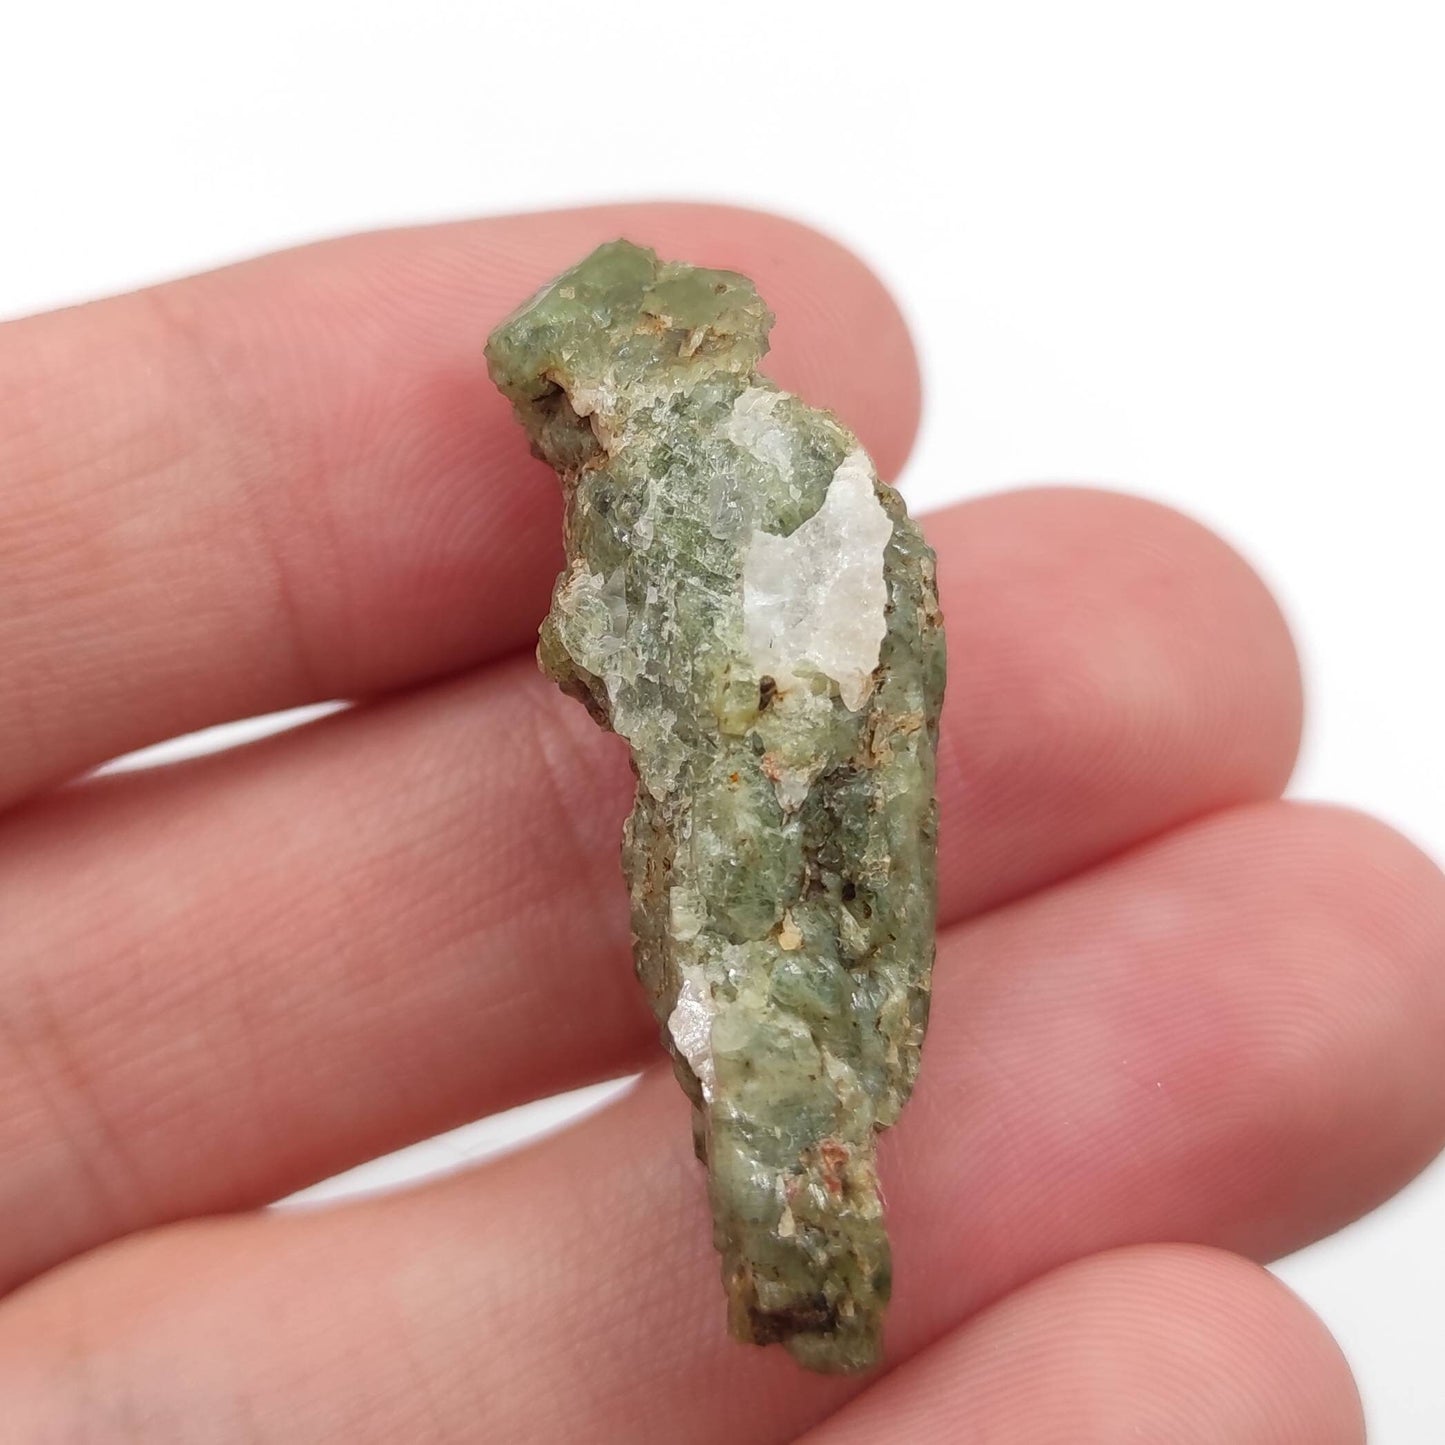 32ct Mini Diopside Crystal Specimen from Haliburton County, Canada - Natural Green Diopside Mineral - Rough Diopside Crystal - Canadian Gems